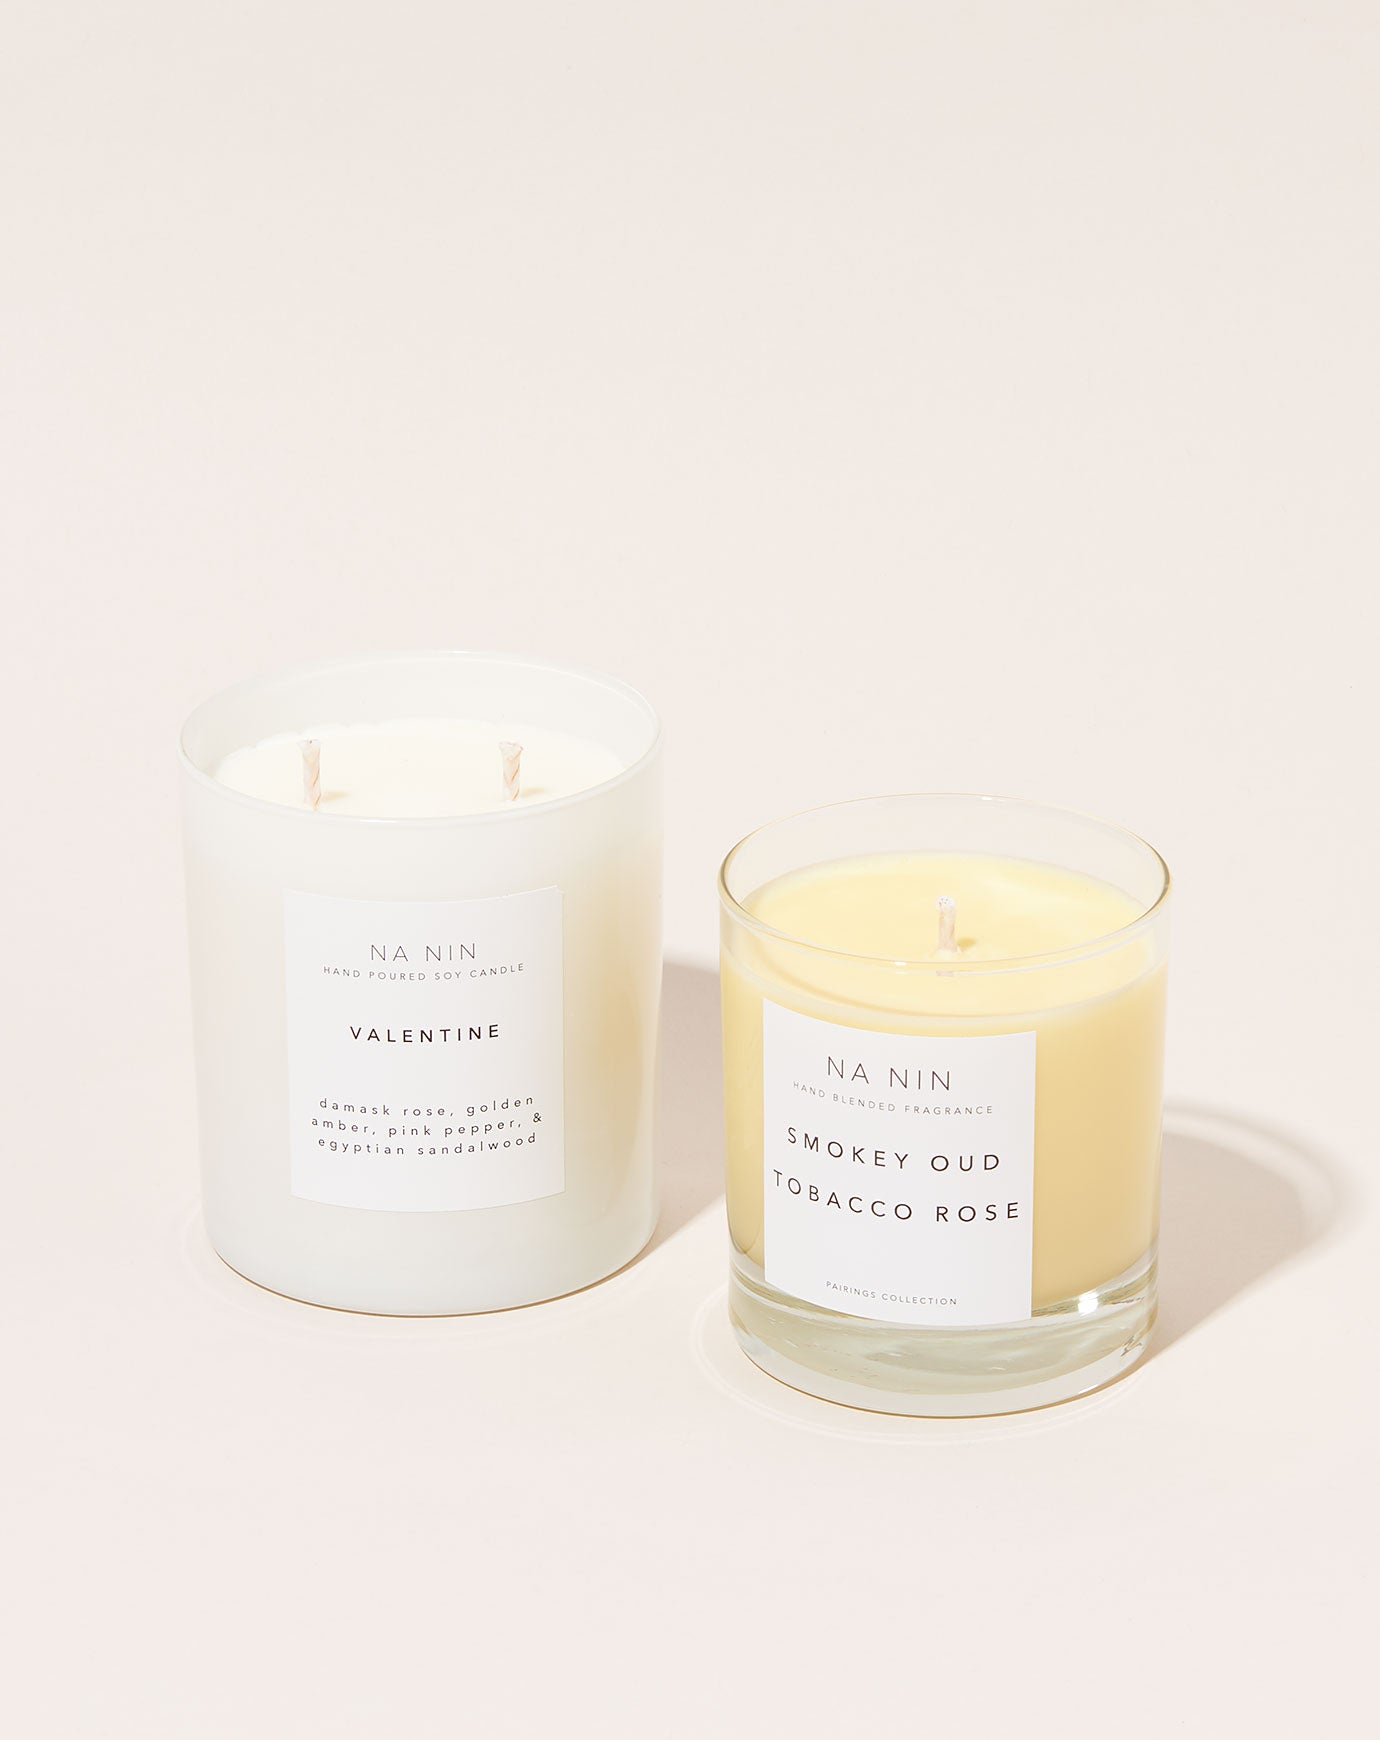 Na Nin Pairings Collection Candle in Smokey Oud / Tobacco Rose